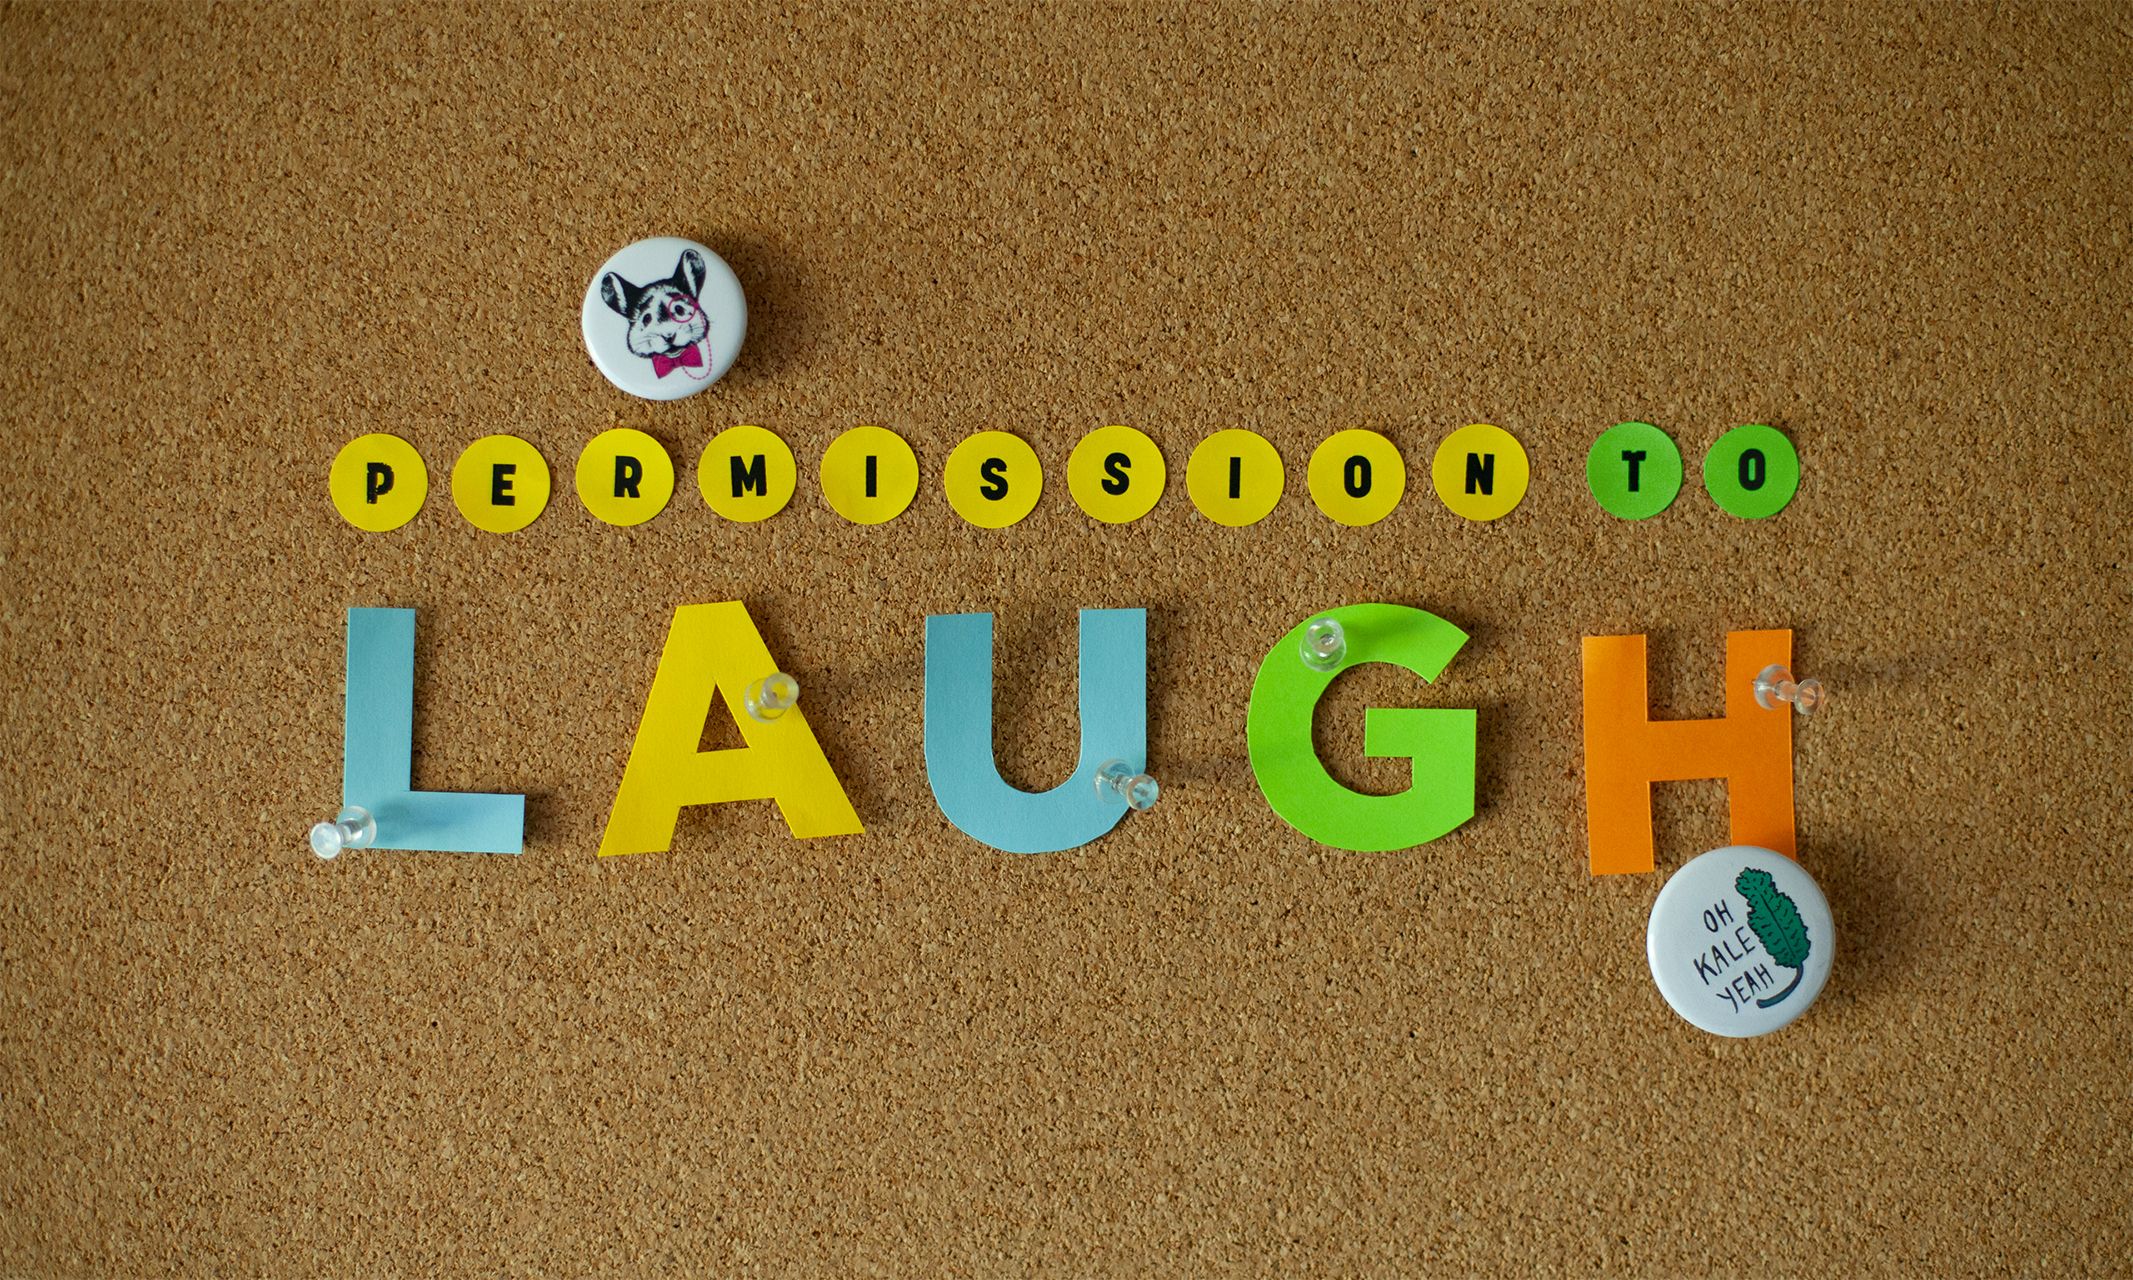 Article title "Permission to Laugh" on a cork board.